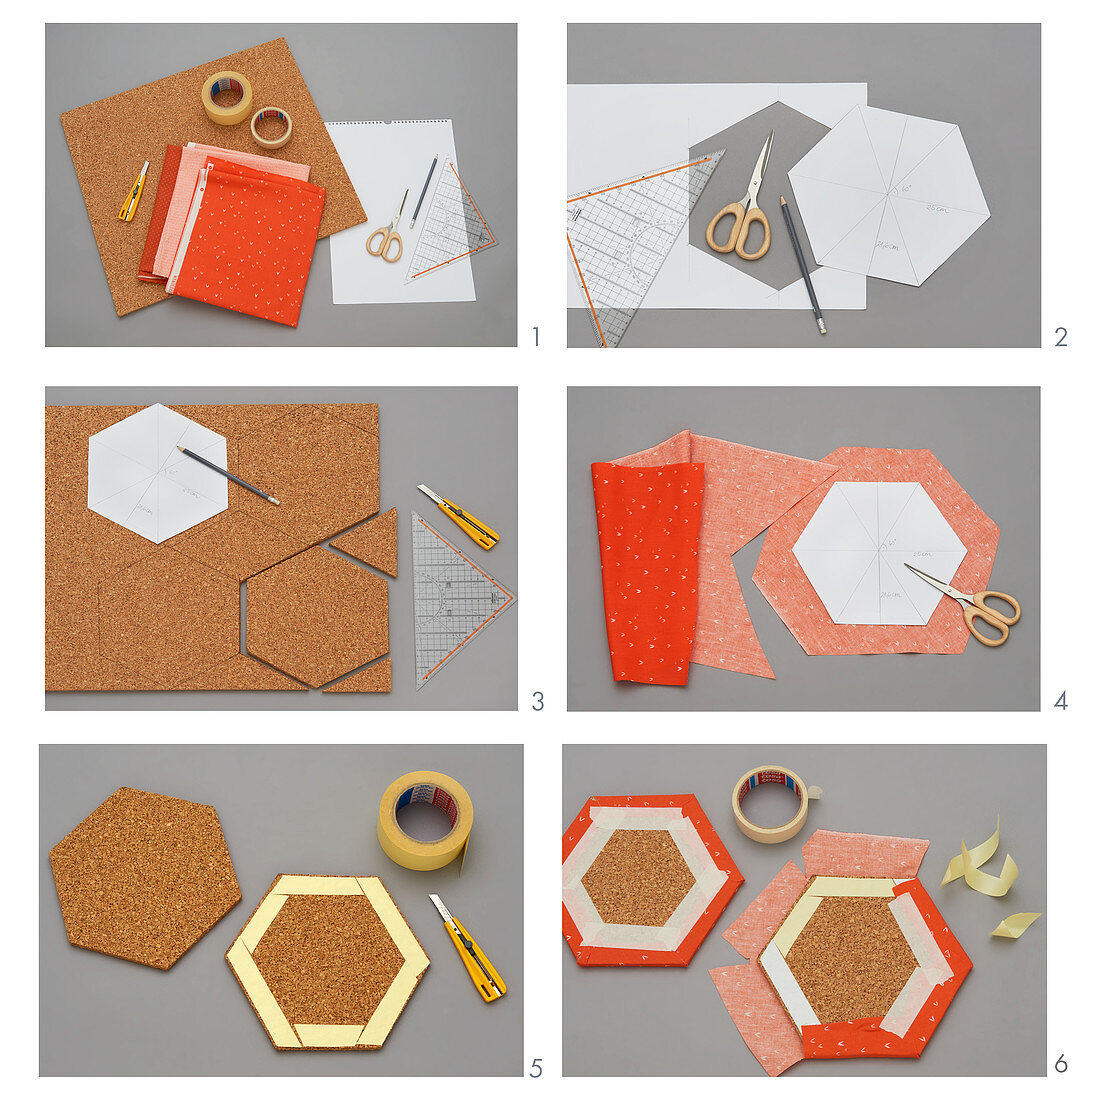 Instructions for making pinboard from hexagonal panels